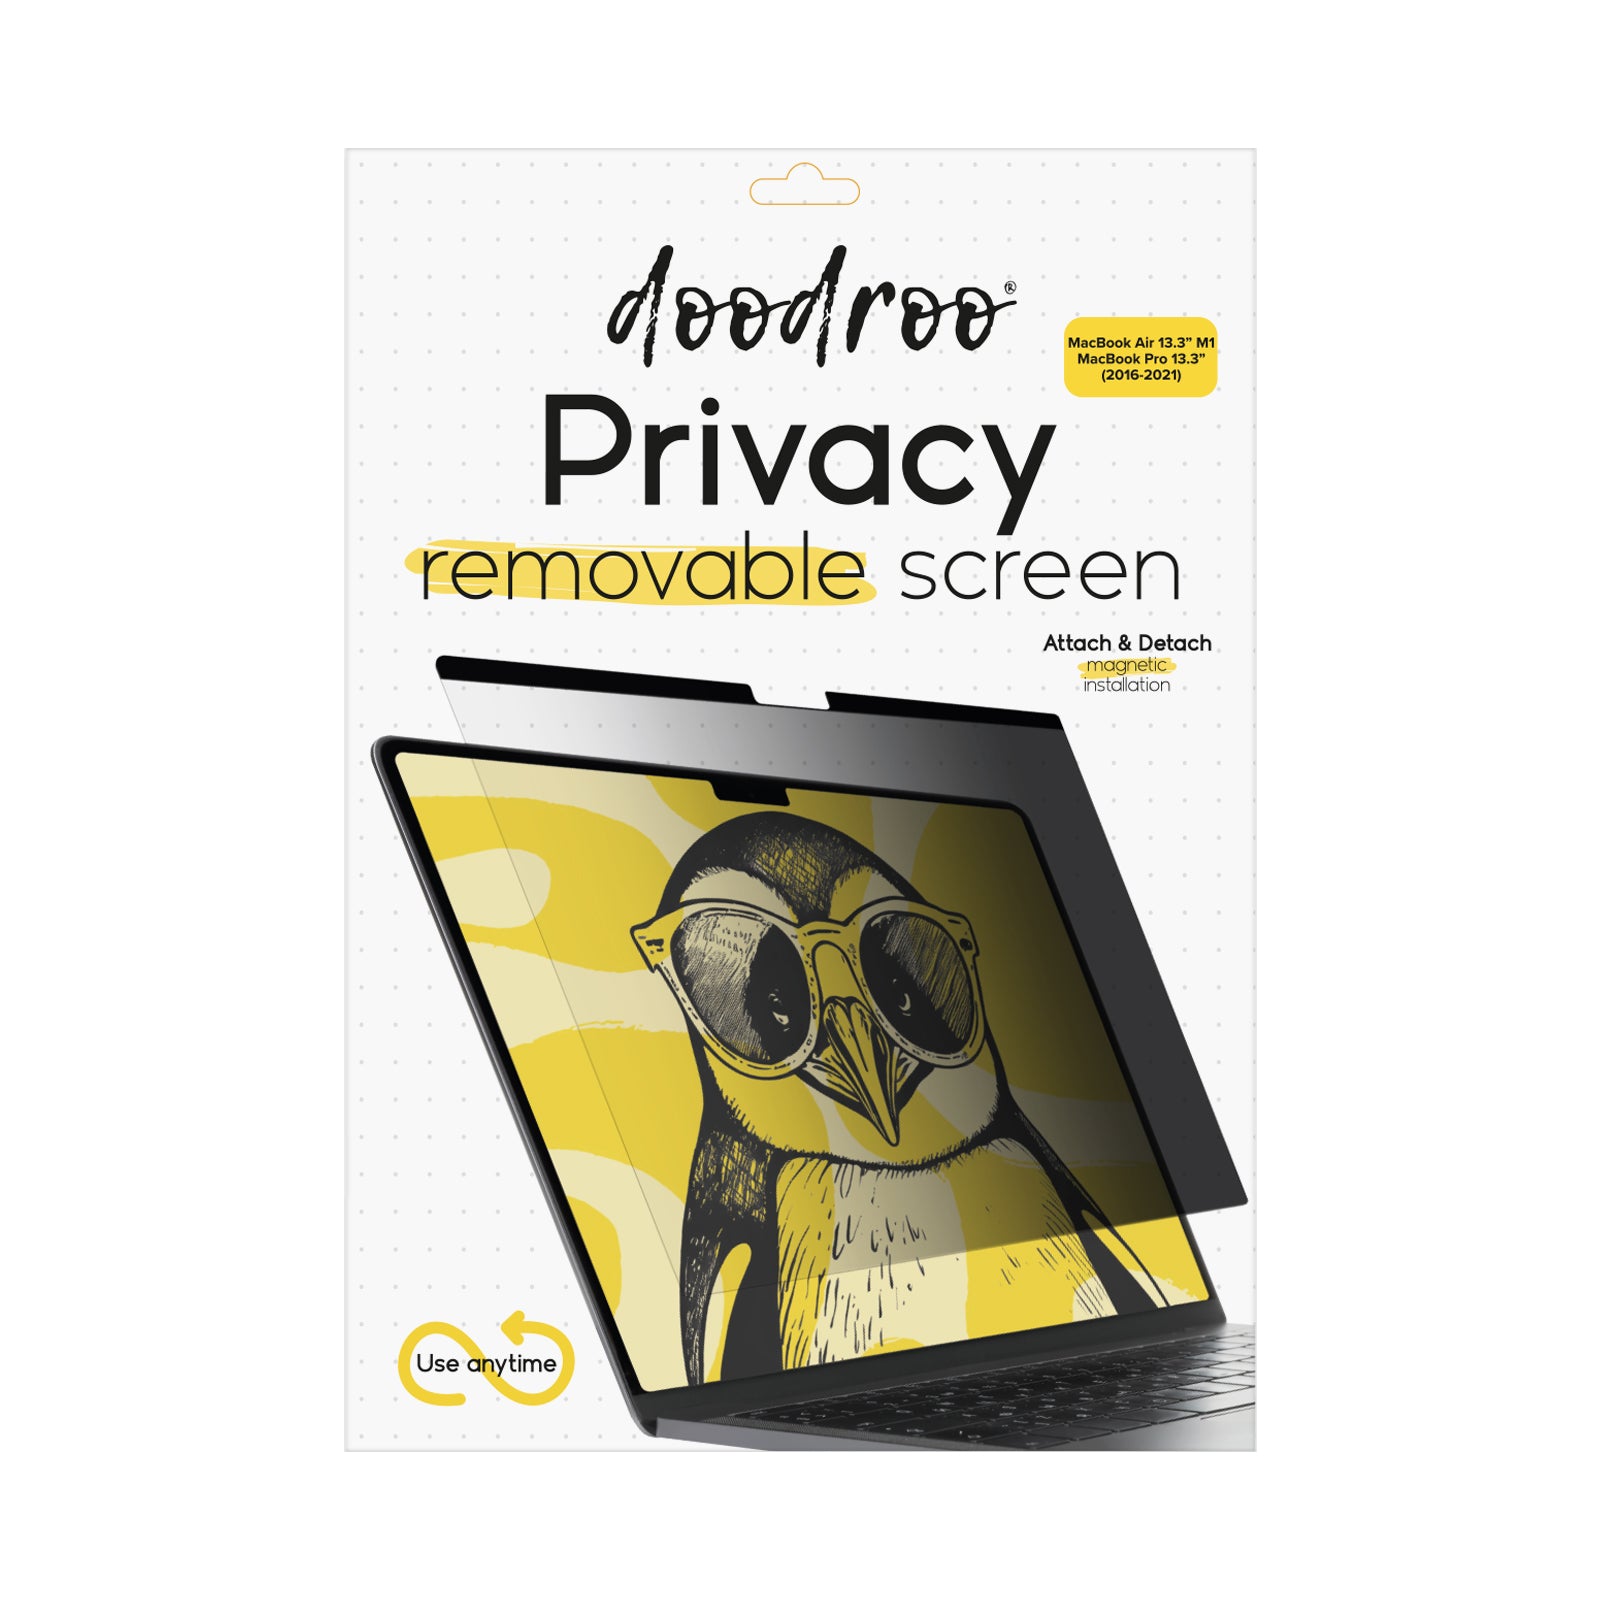 Privacy film for MacBook Air 13.3/Pro 13.3 | doodroo